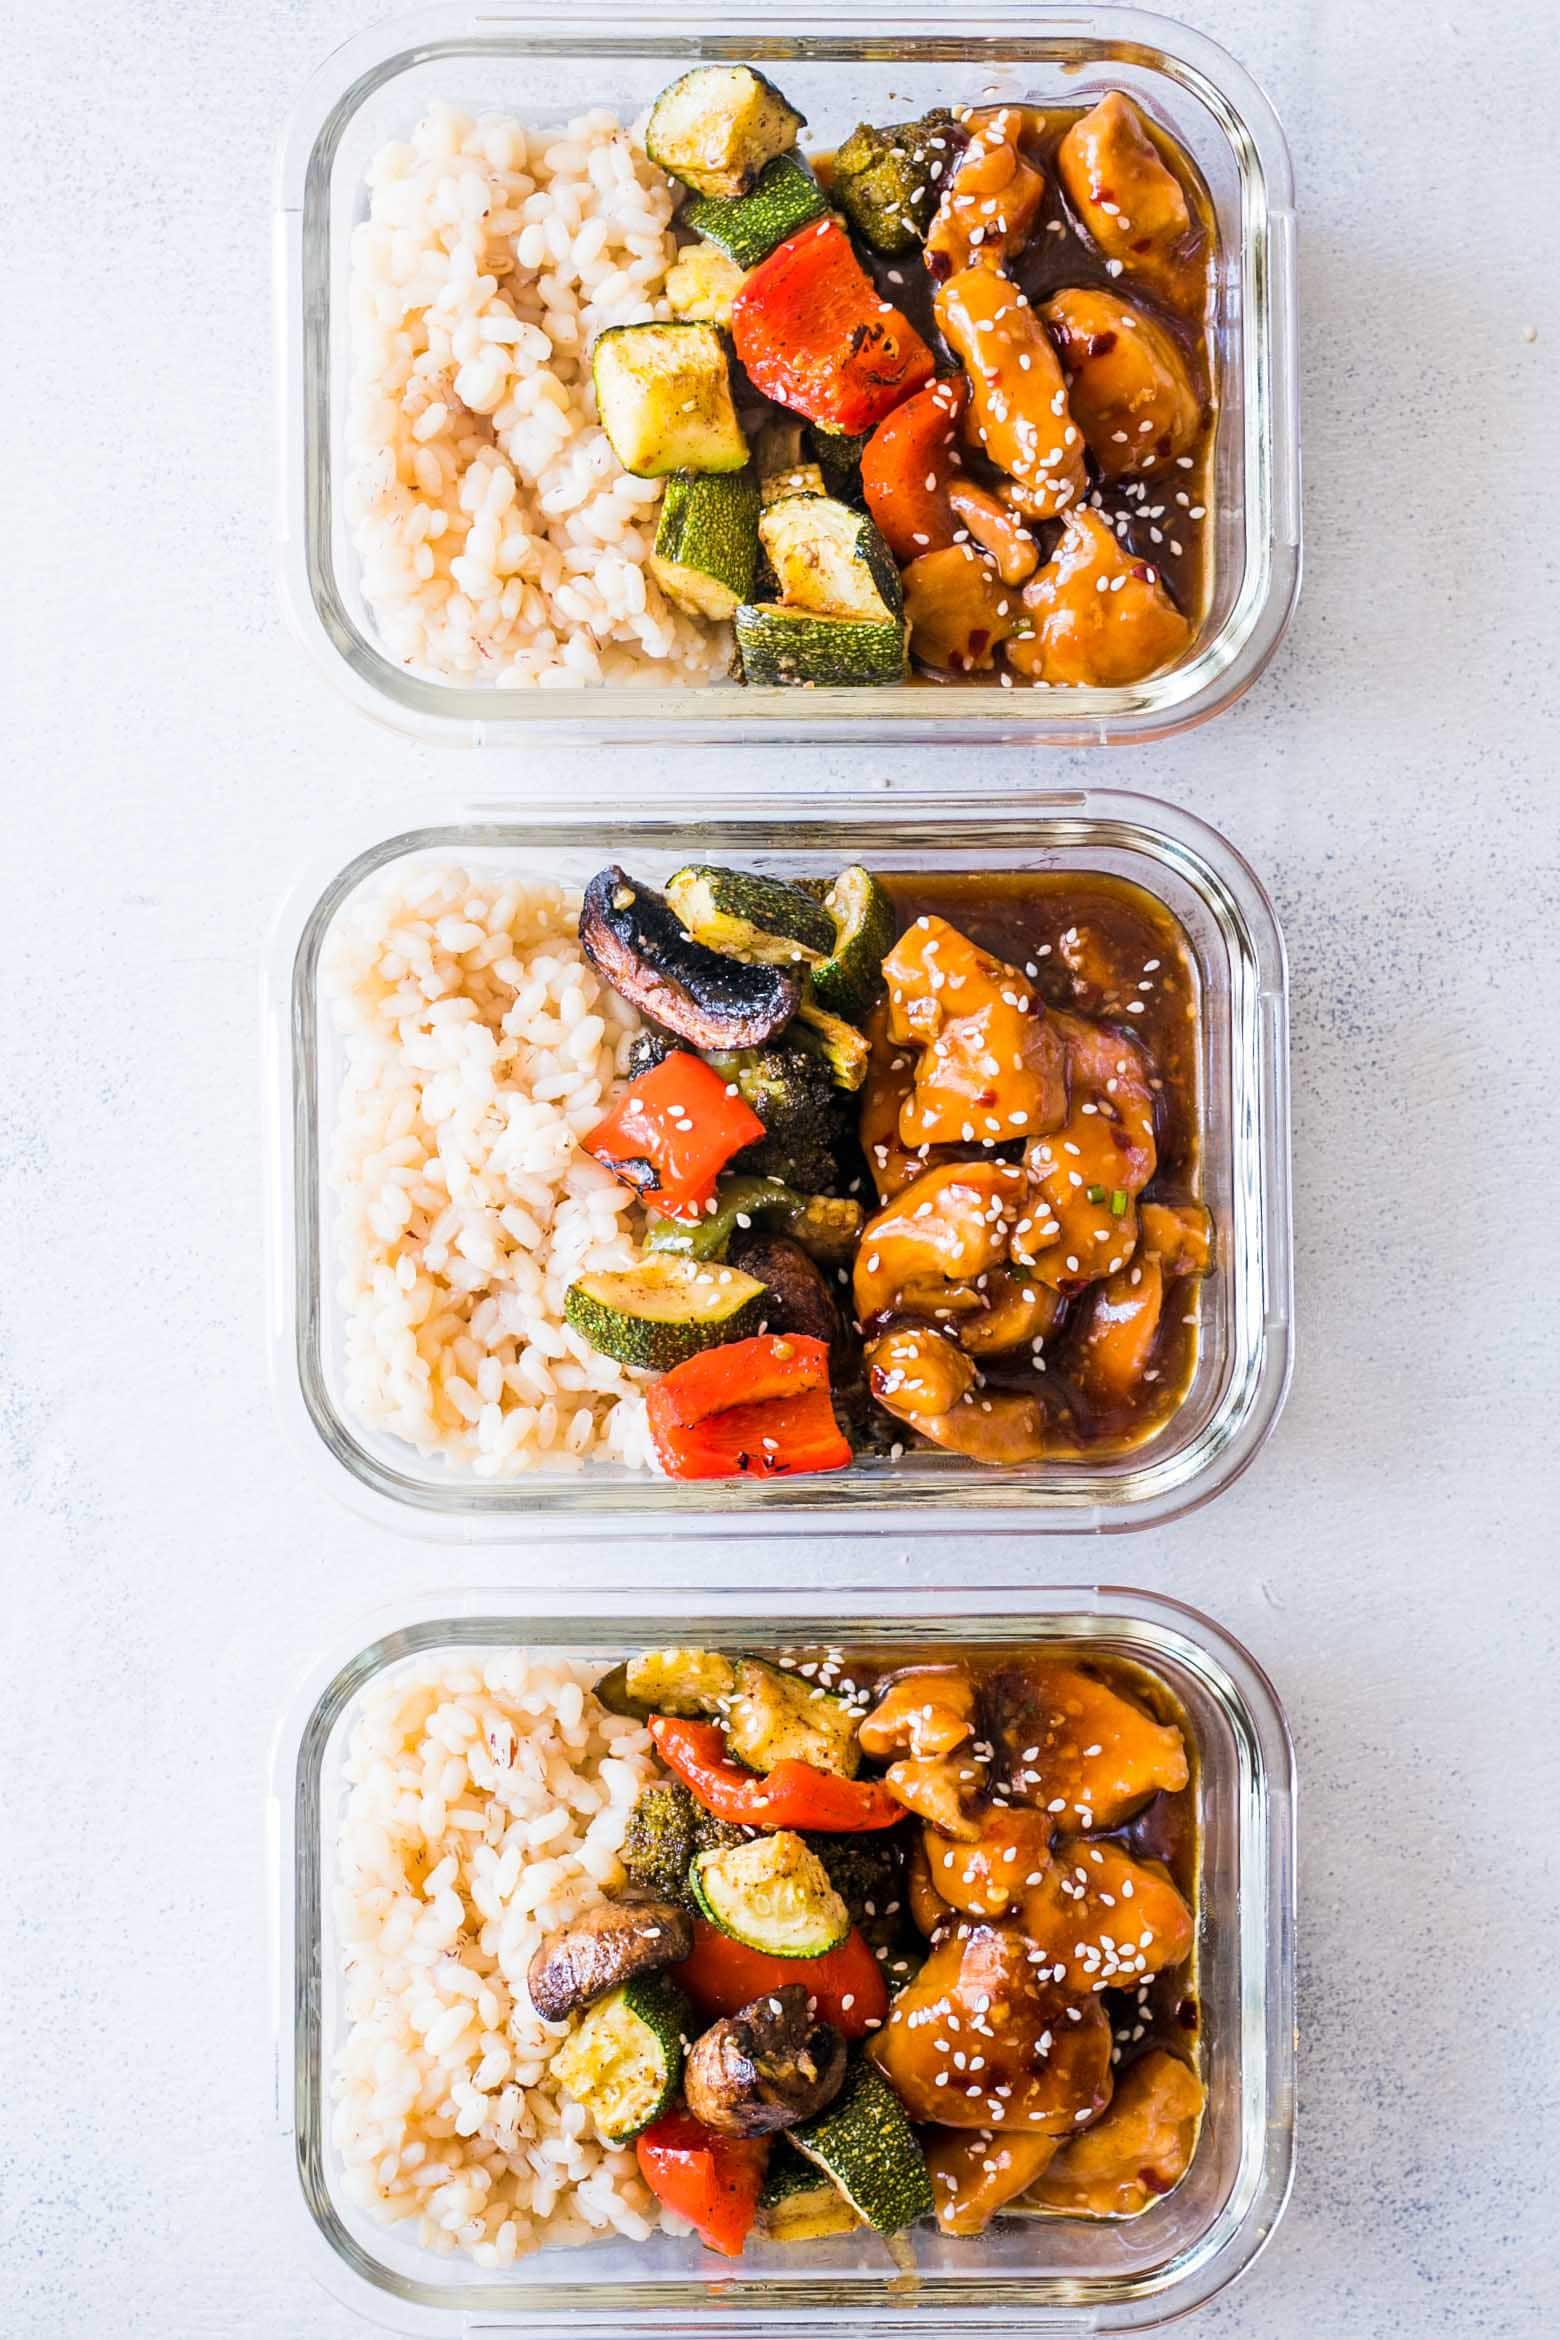 Teriyaki Chicken Stir Fry Meal Prep Lunch Boxes from myfoodstory.com on foodiecrush.com